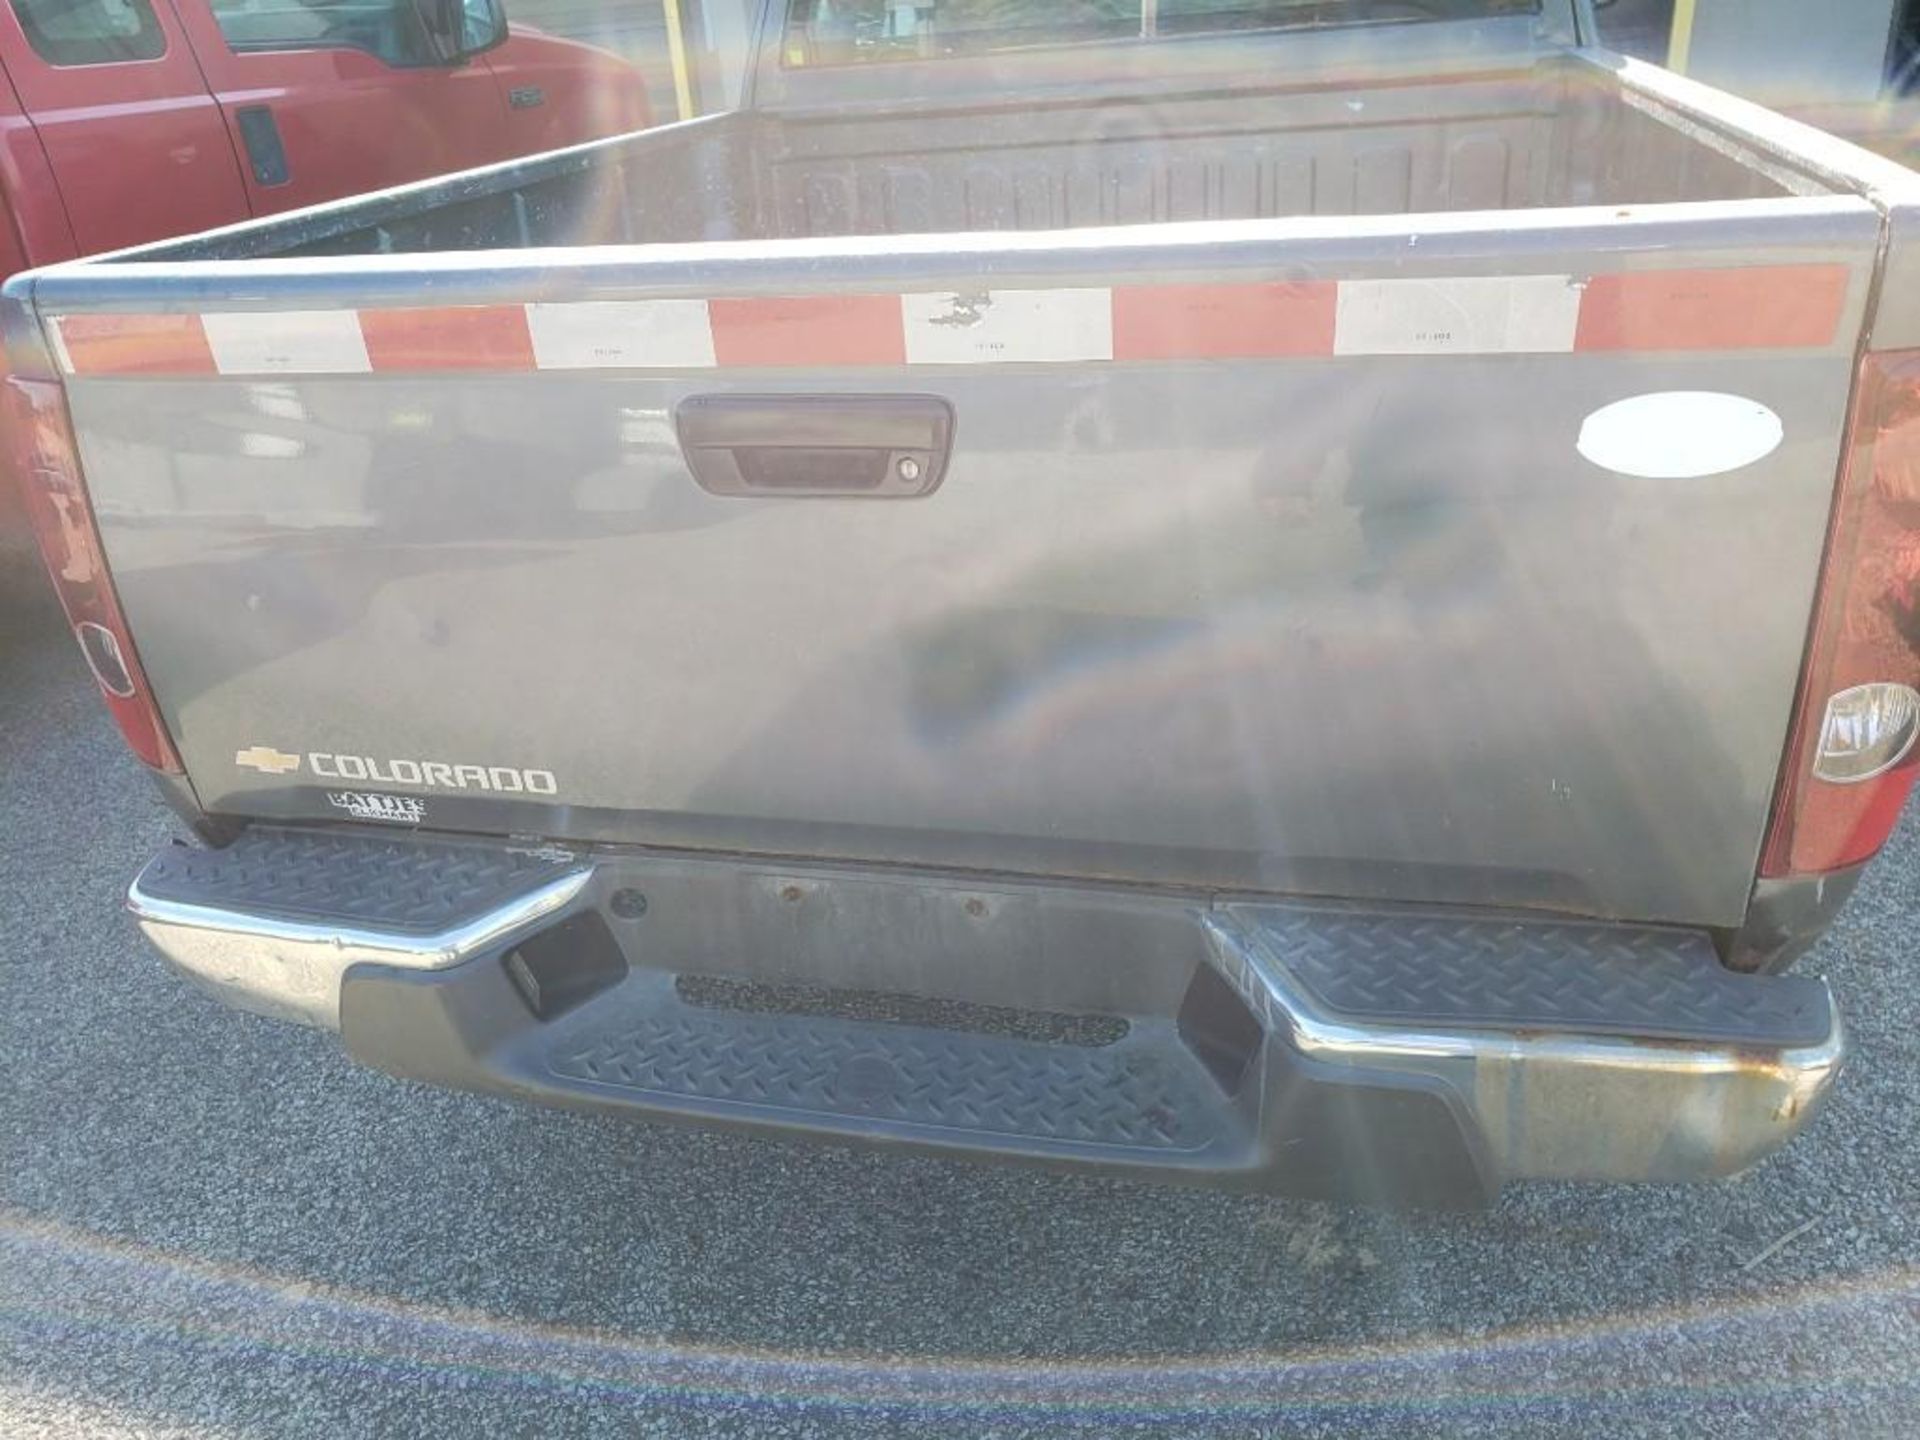 2006 Chevrolet Colorado. VIN 1GCCS196868135452. Frame has rust and one hole can be seen. - Image 21 of 25